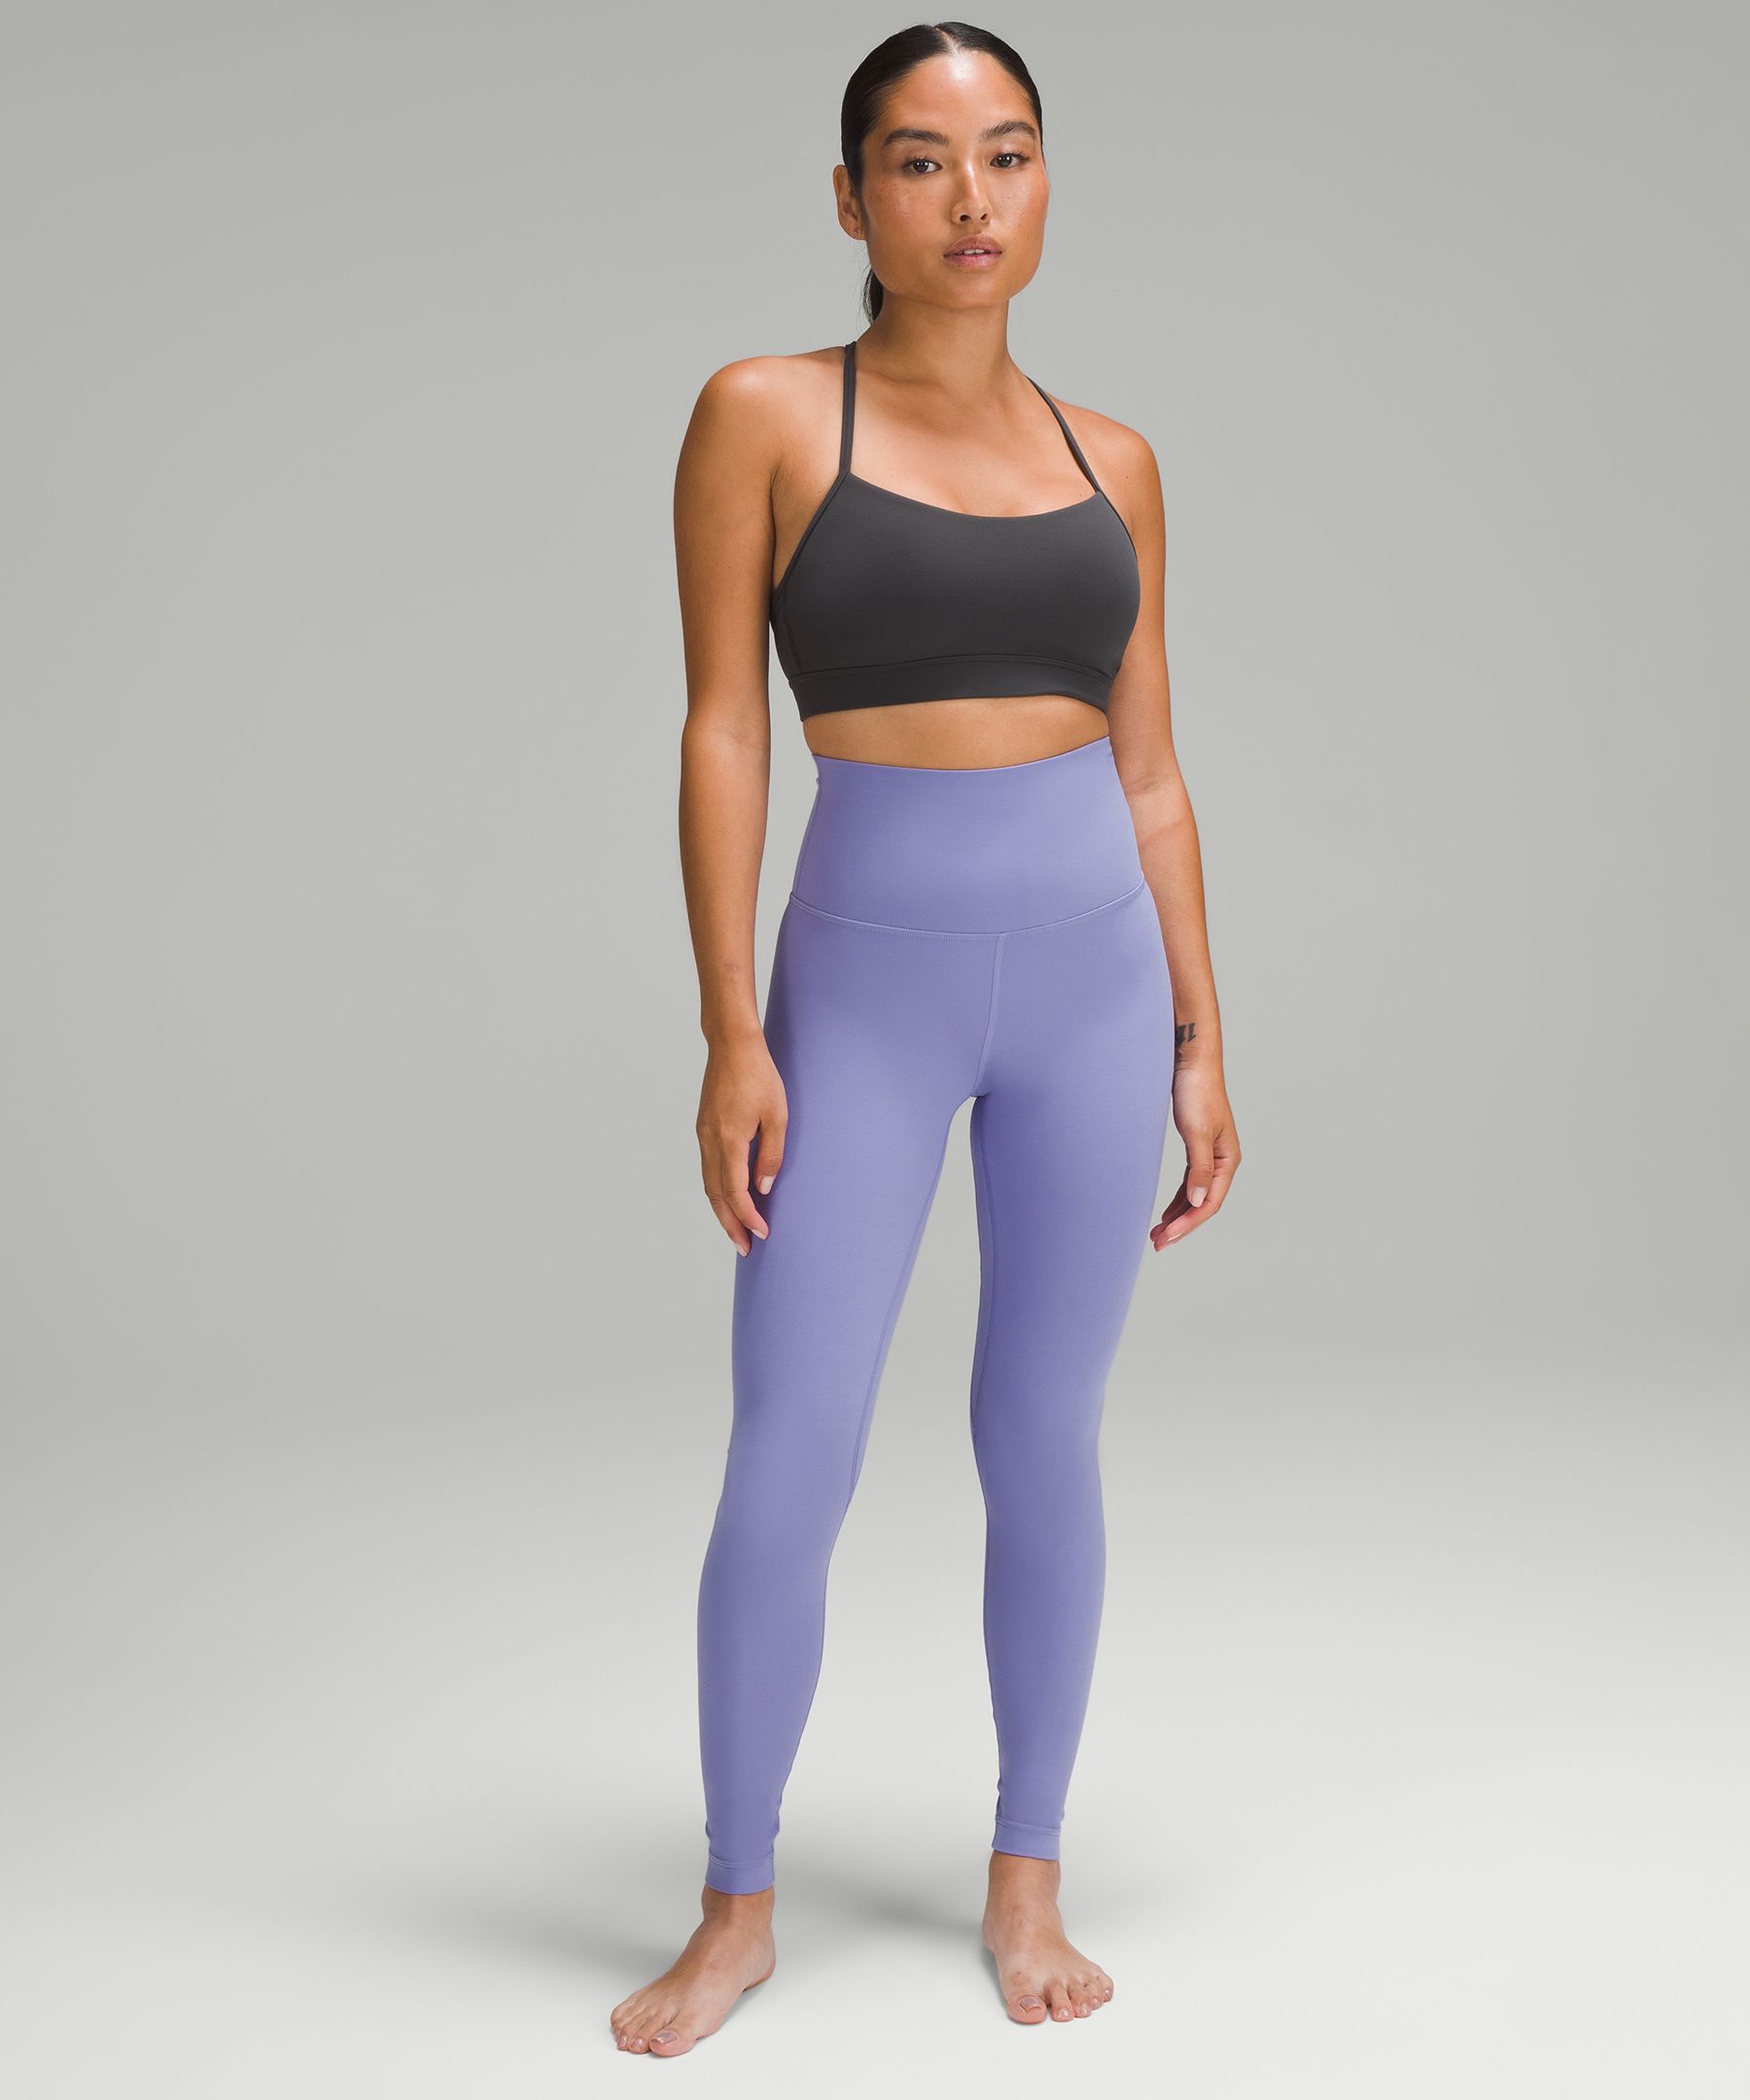 Pre-Owned Lululemon Athletica Womens Size 4 Active India